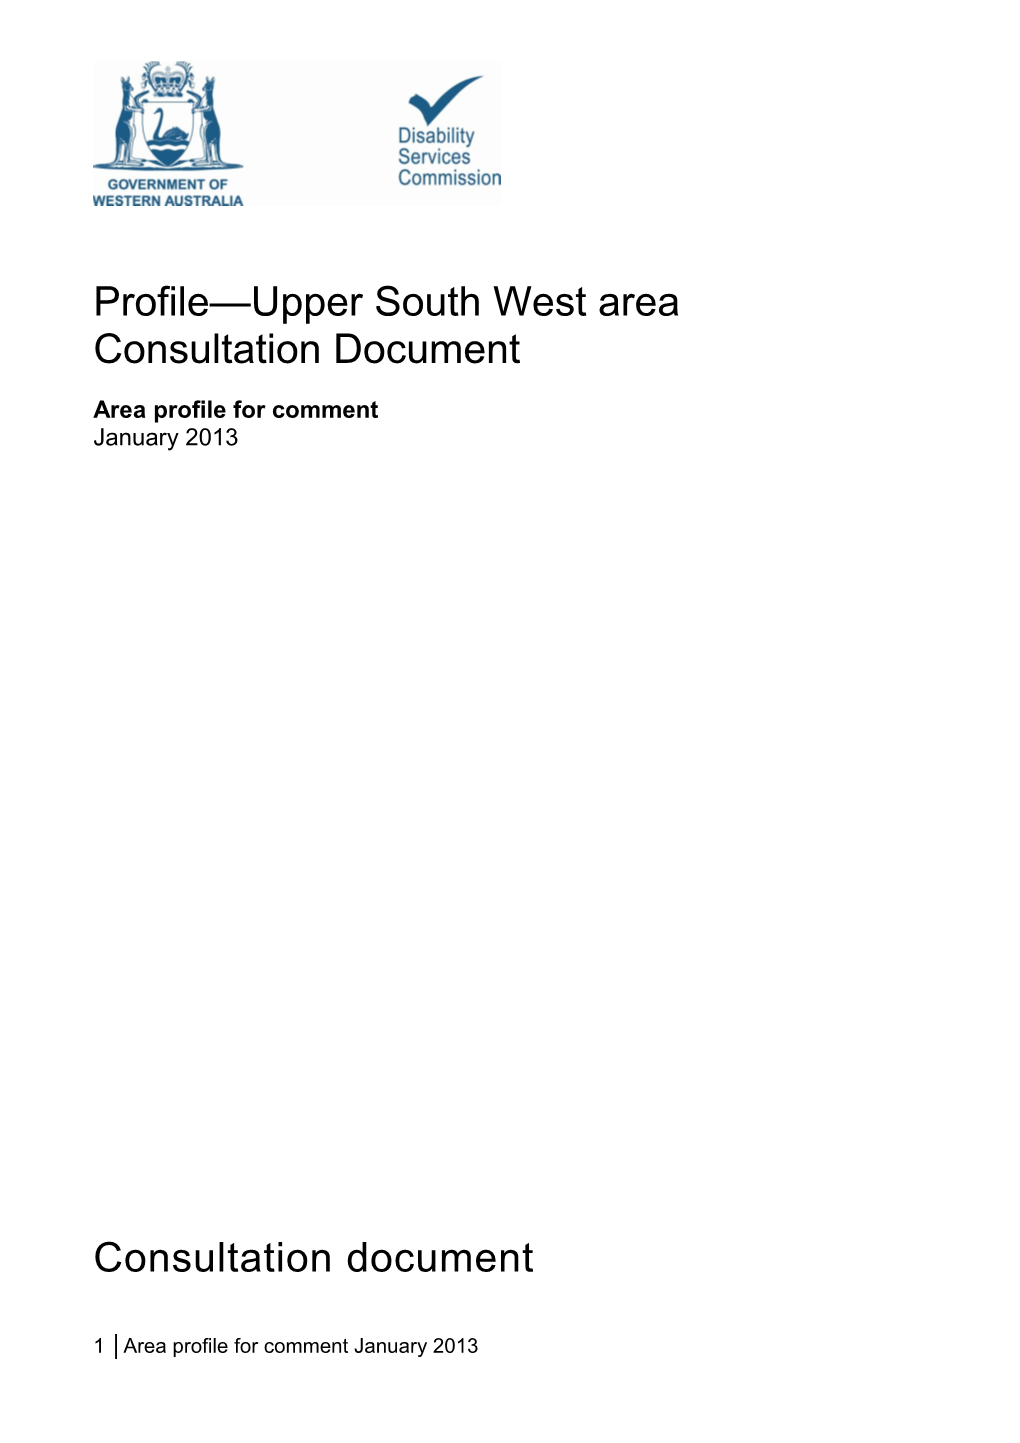 Upper South West Area Profile Consultation Document - Accessible